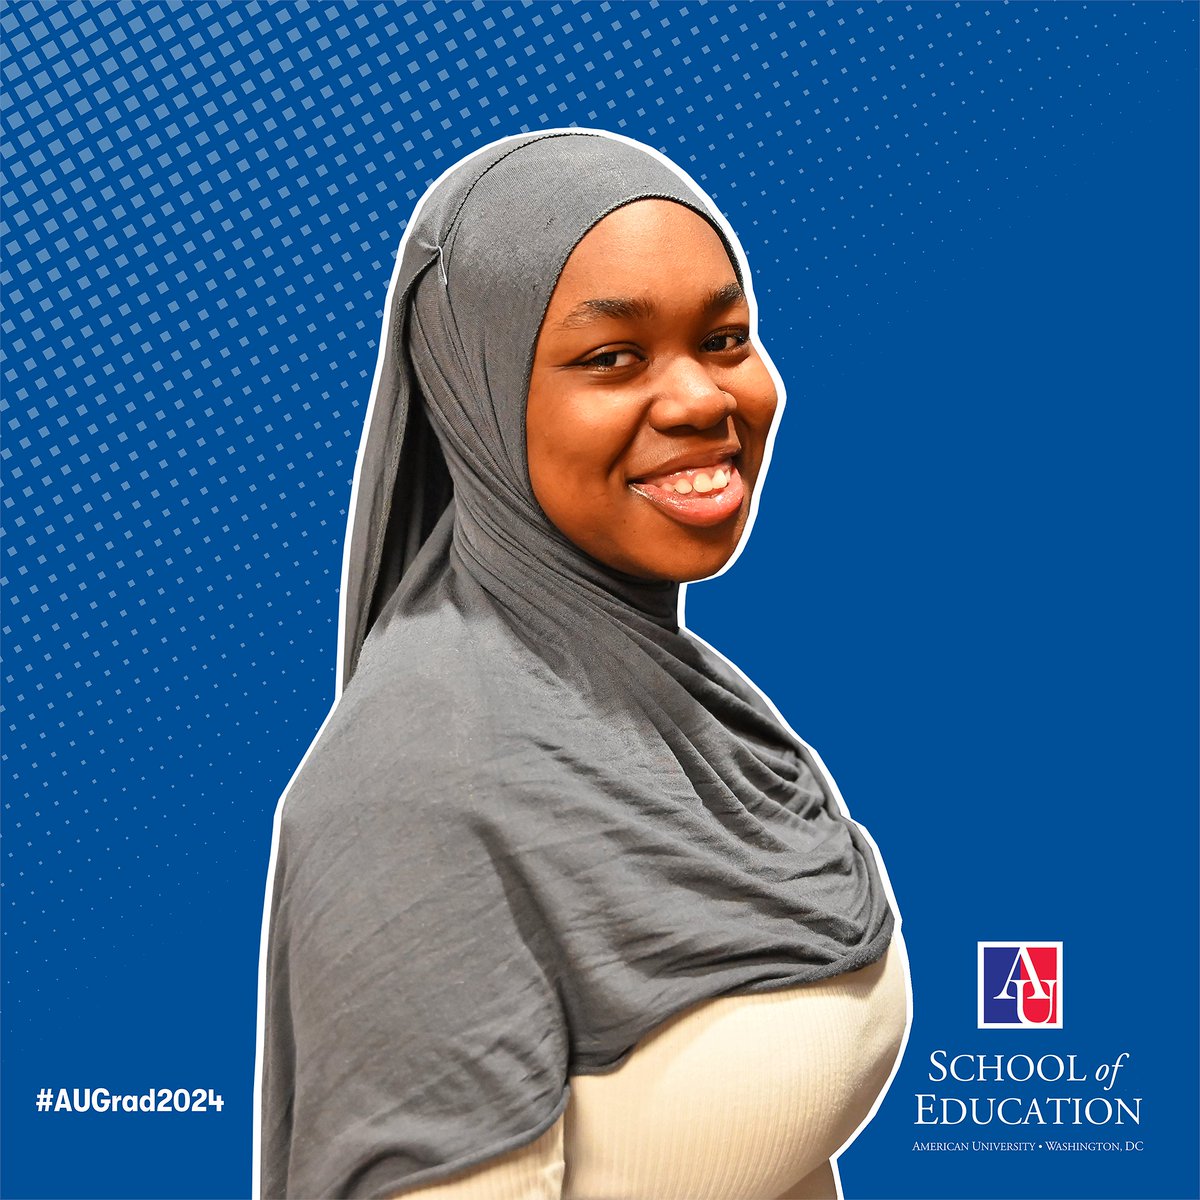 #AUGrad2024 Student Profile: Sarata Gumaneh > 'Classrooms bring me immense joy, and I have a passion to make a positive impact on students’ lives. I am incredibly grateful for the opportunity to pursue this passion through the School of Education.' @AmericanU #graduation 🦅